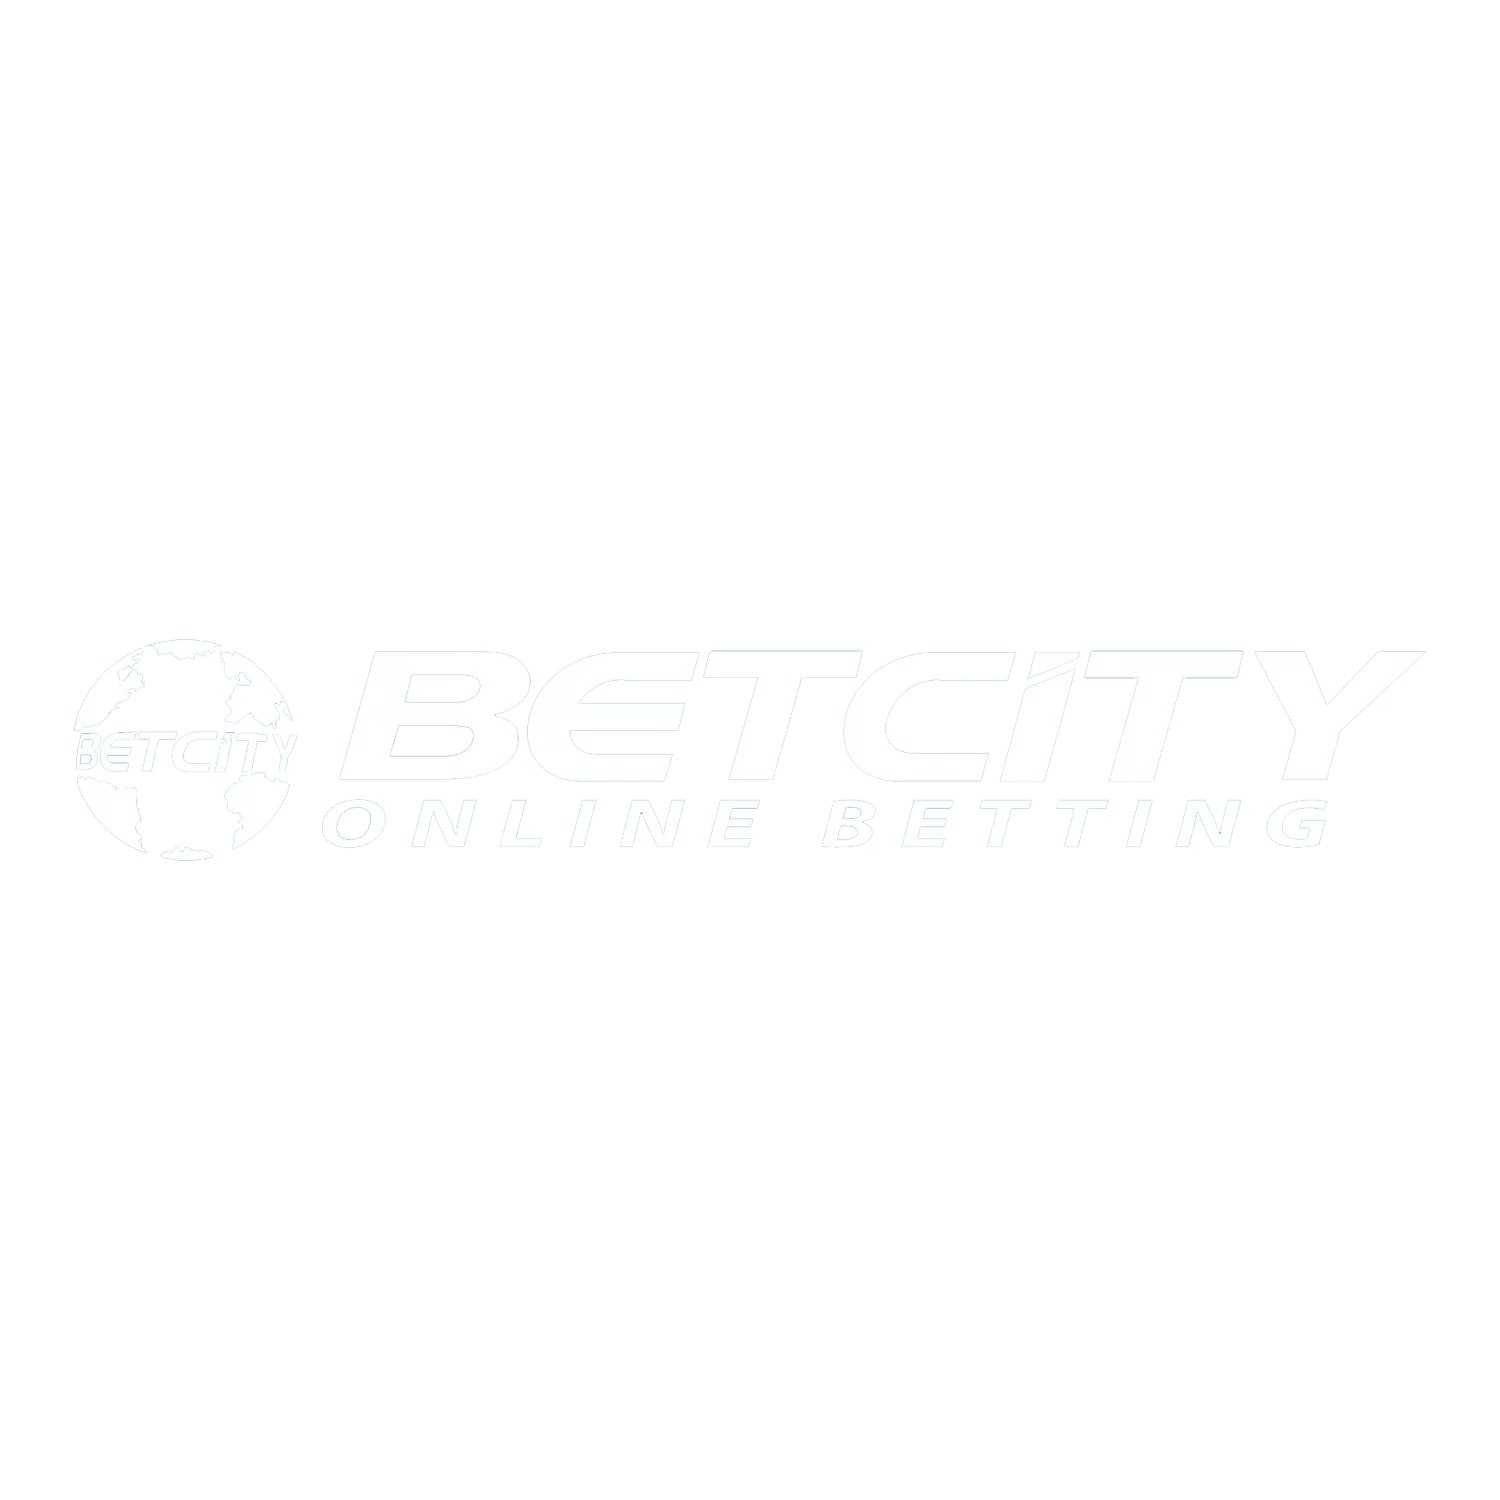 Learn how to place bets on sports and esports matches on the Betcity site and in its apps.